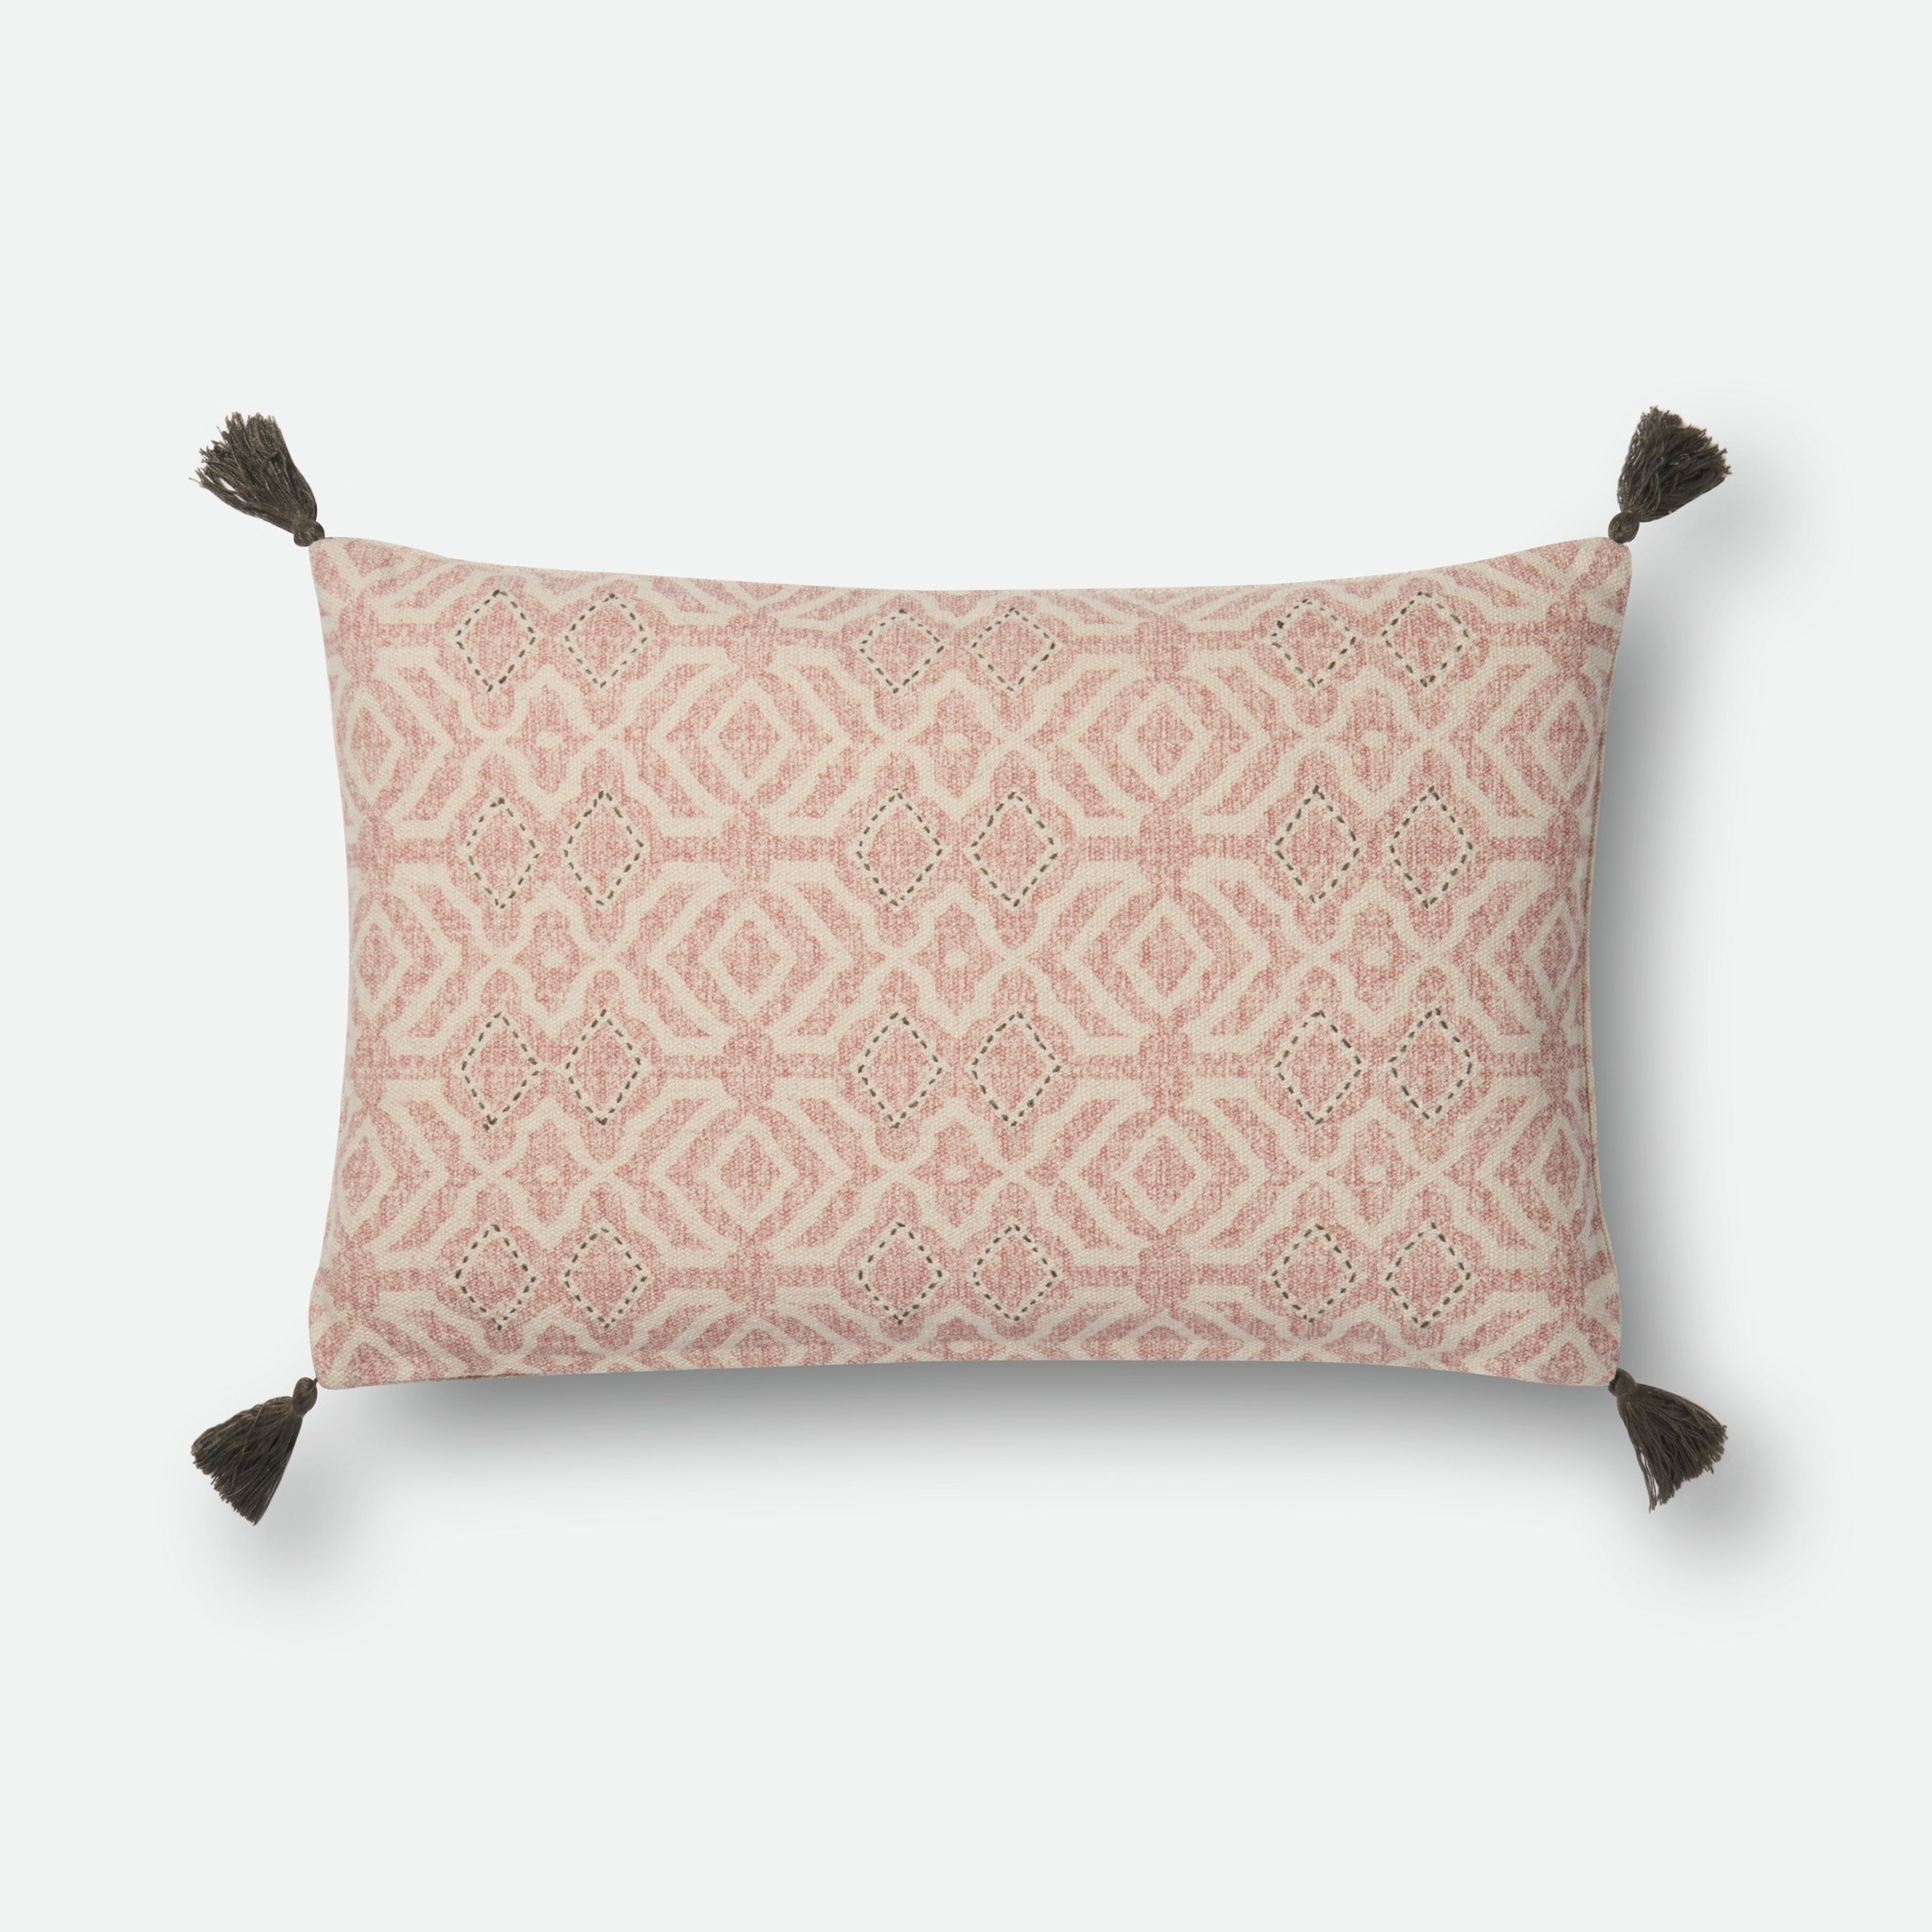 PILLOWS Pillow NATURAL / PINK 13" X 21" Cover w/Down - Loloi Rugs